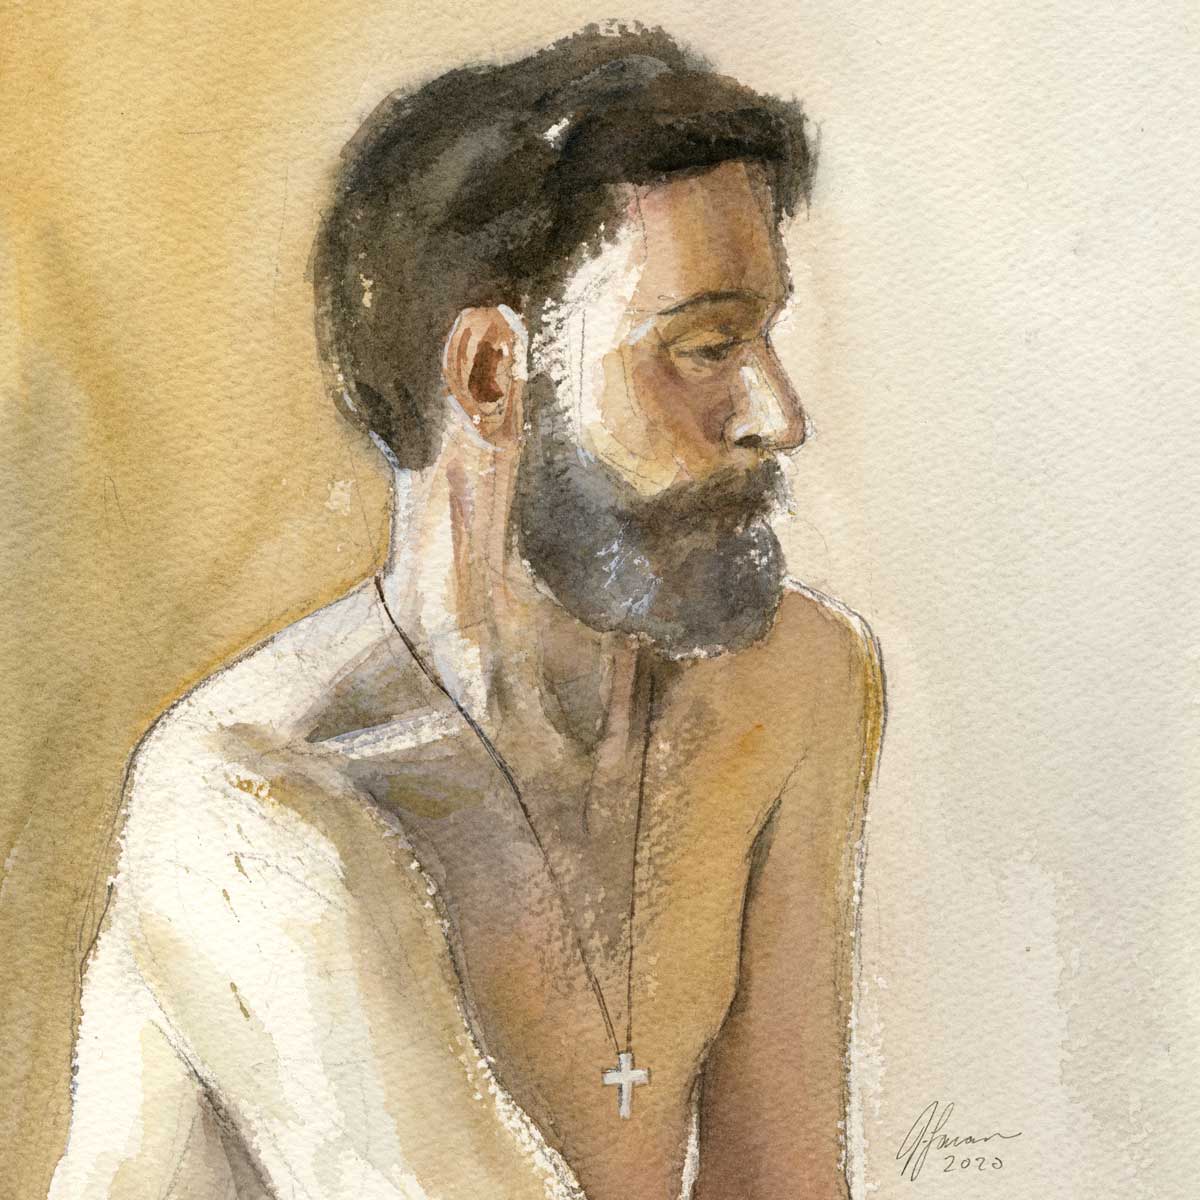 Watercolor studio painting from live model of bearded man with light skin seen in profile